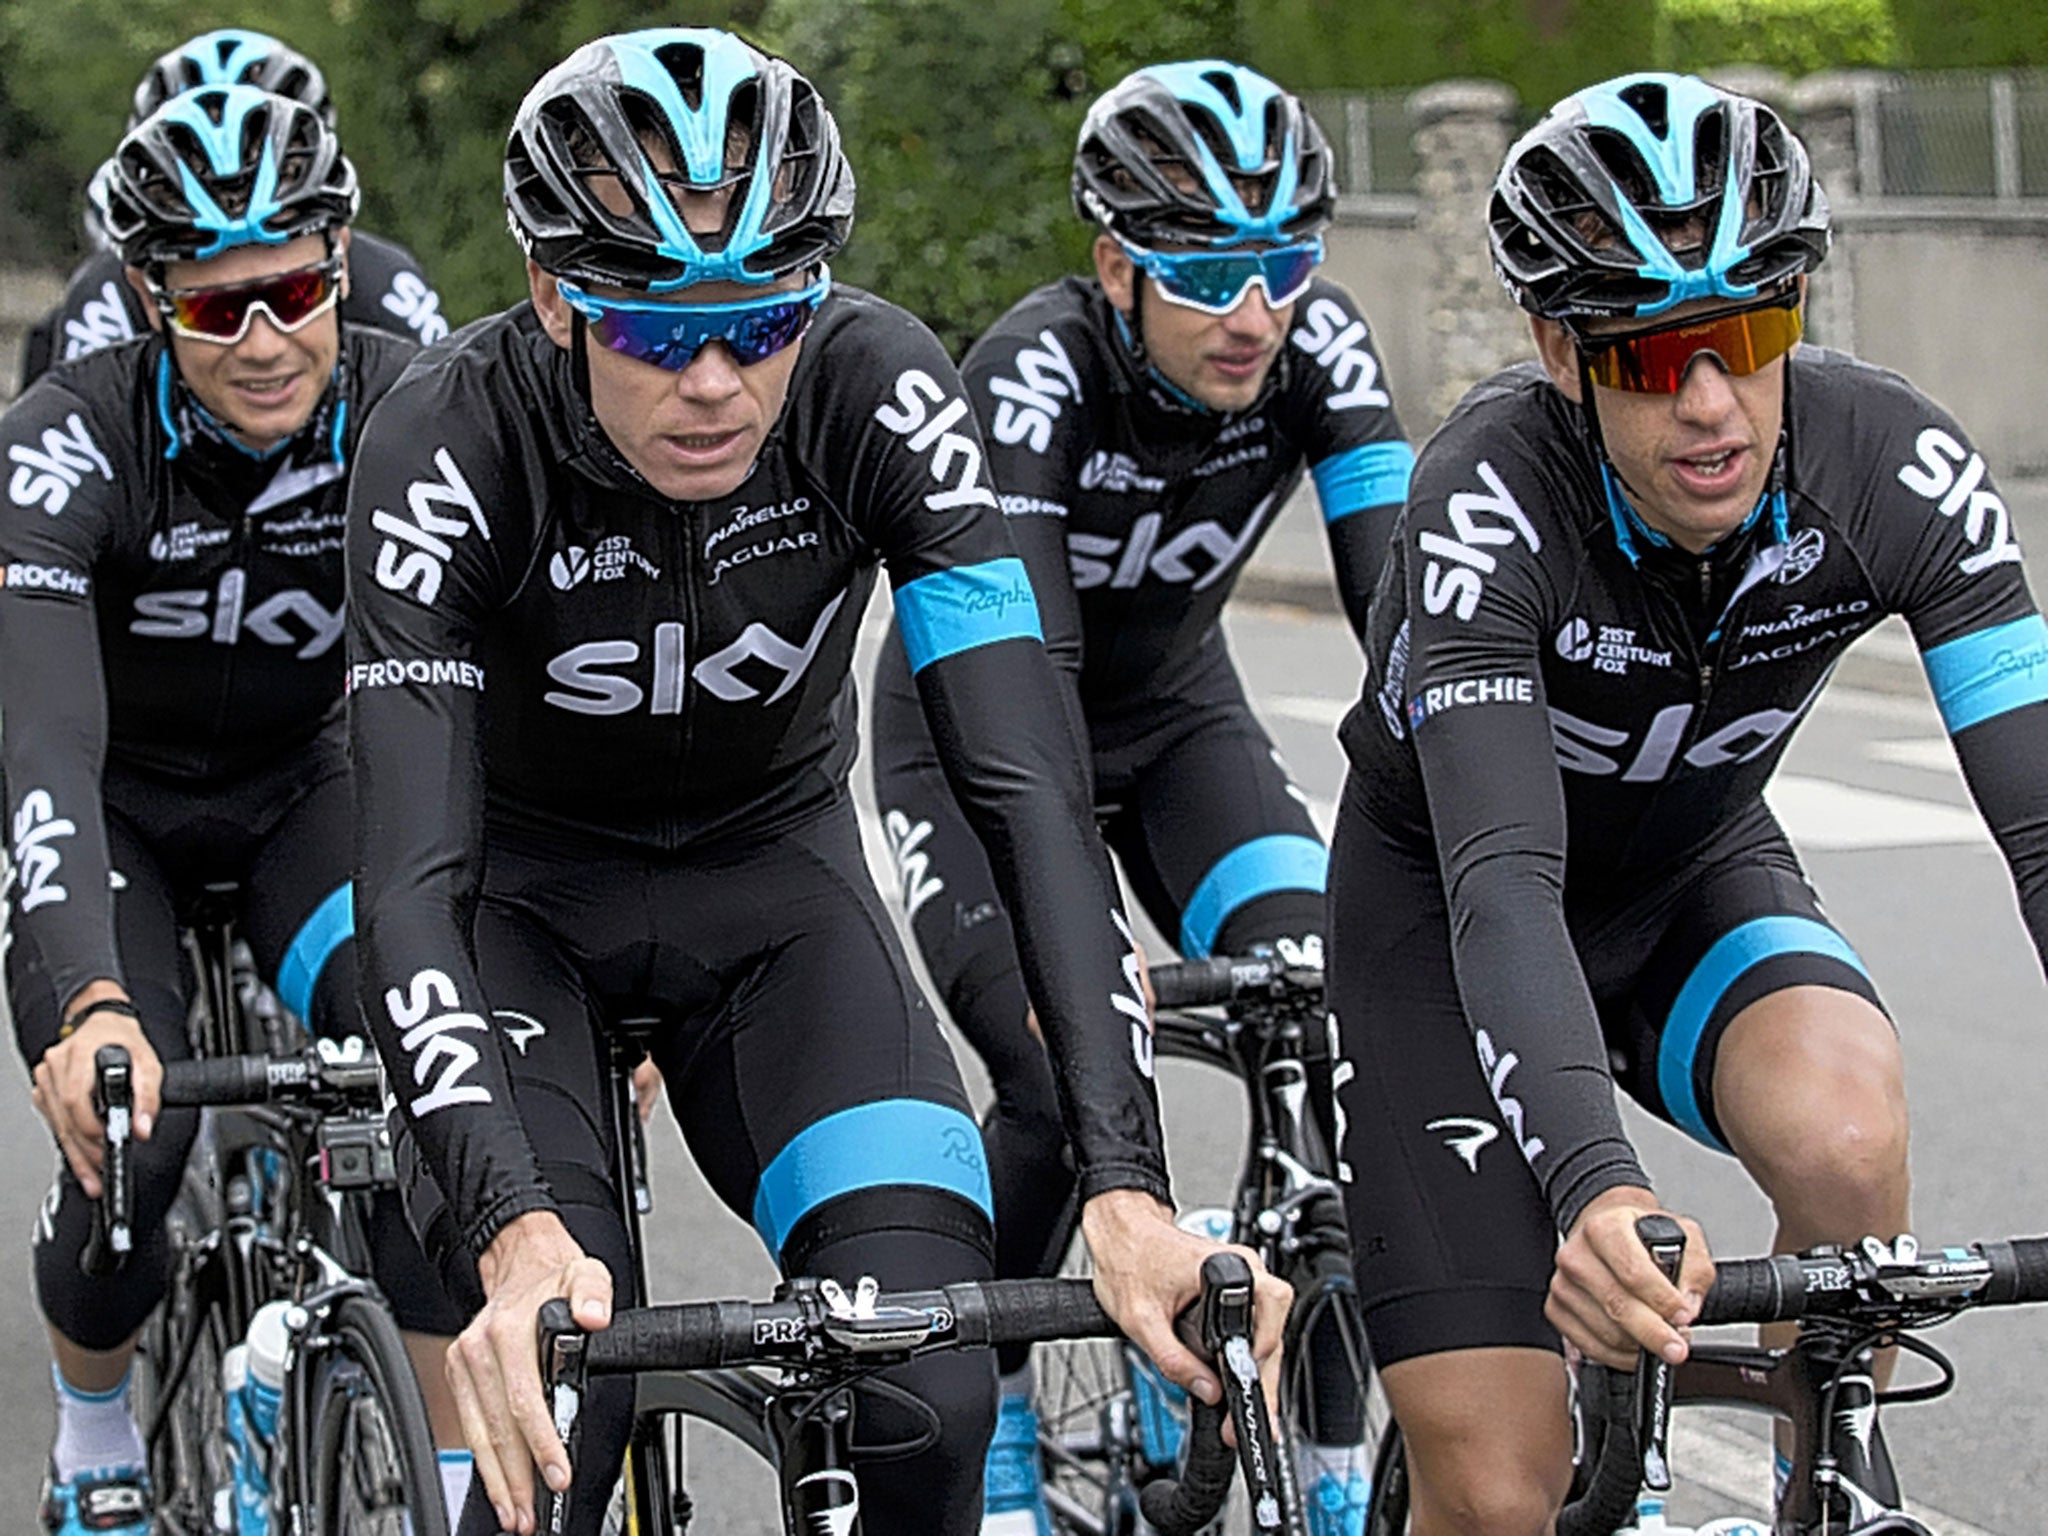 Sky's Chris Froome (left) and Richie Porte on a training ride during Monday's rest day